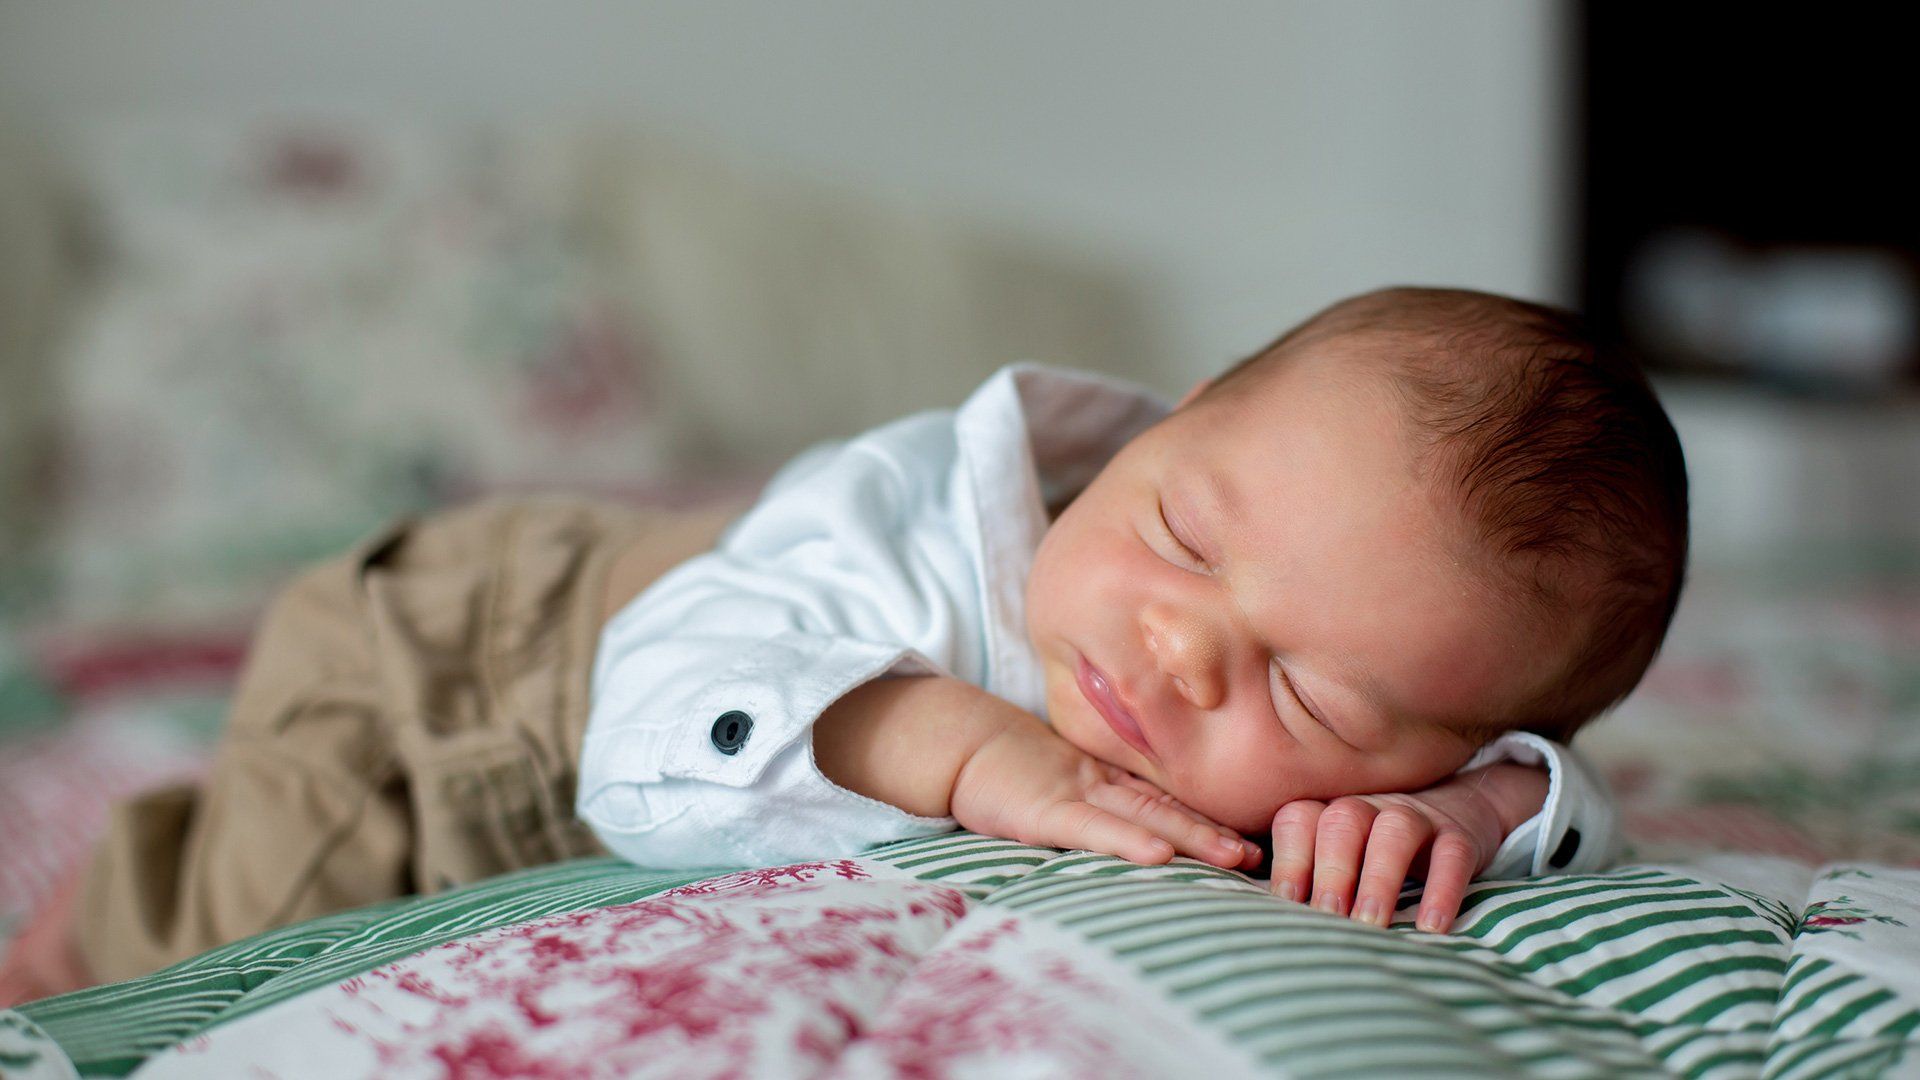 A baby wears a shirt and lies on its front on a green, pink and white blanket.